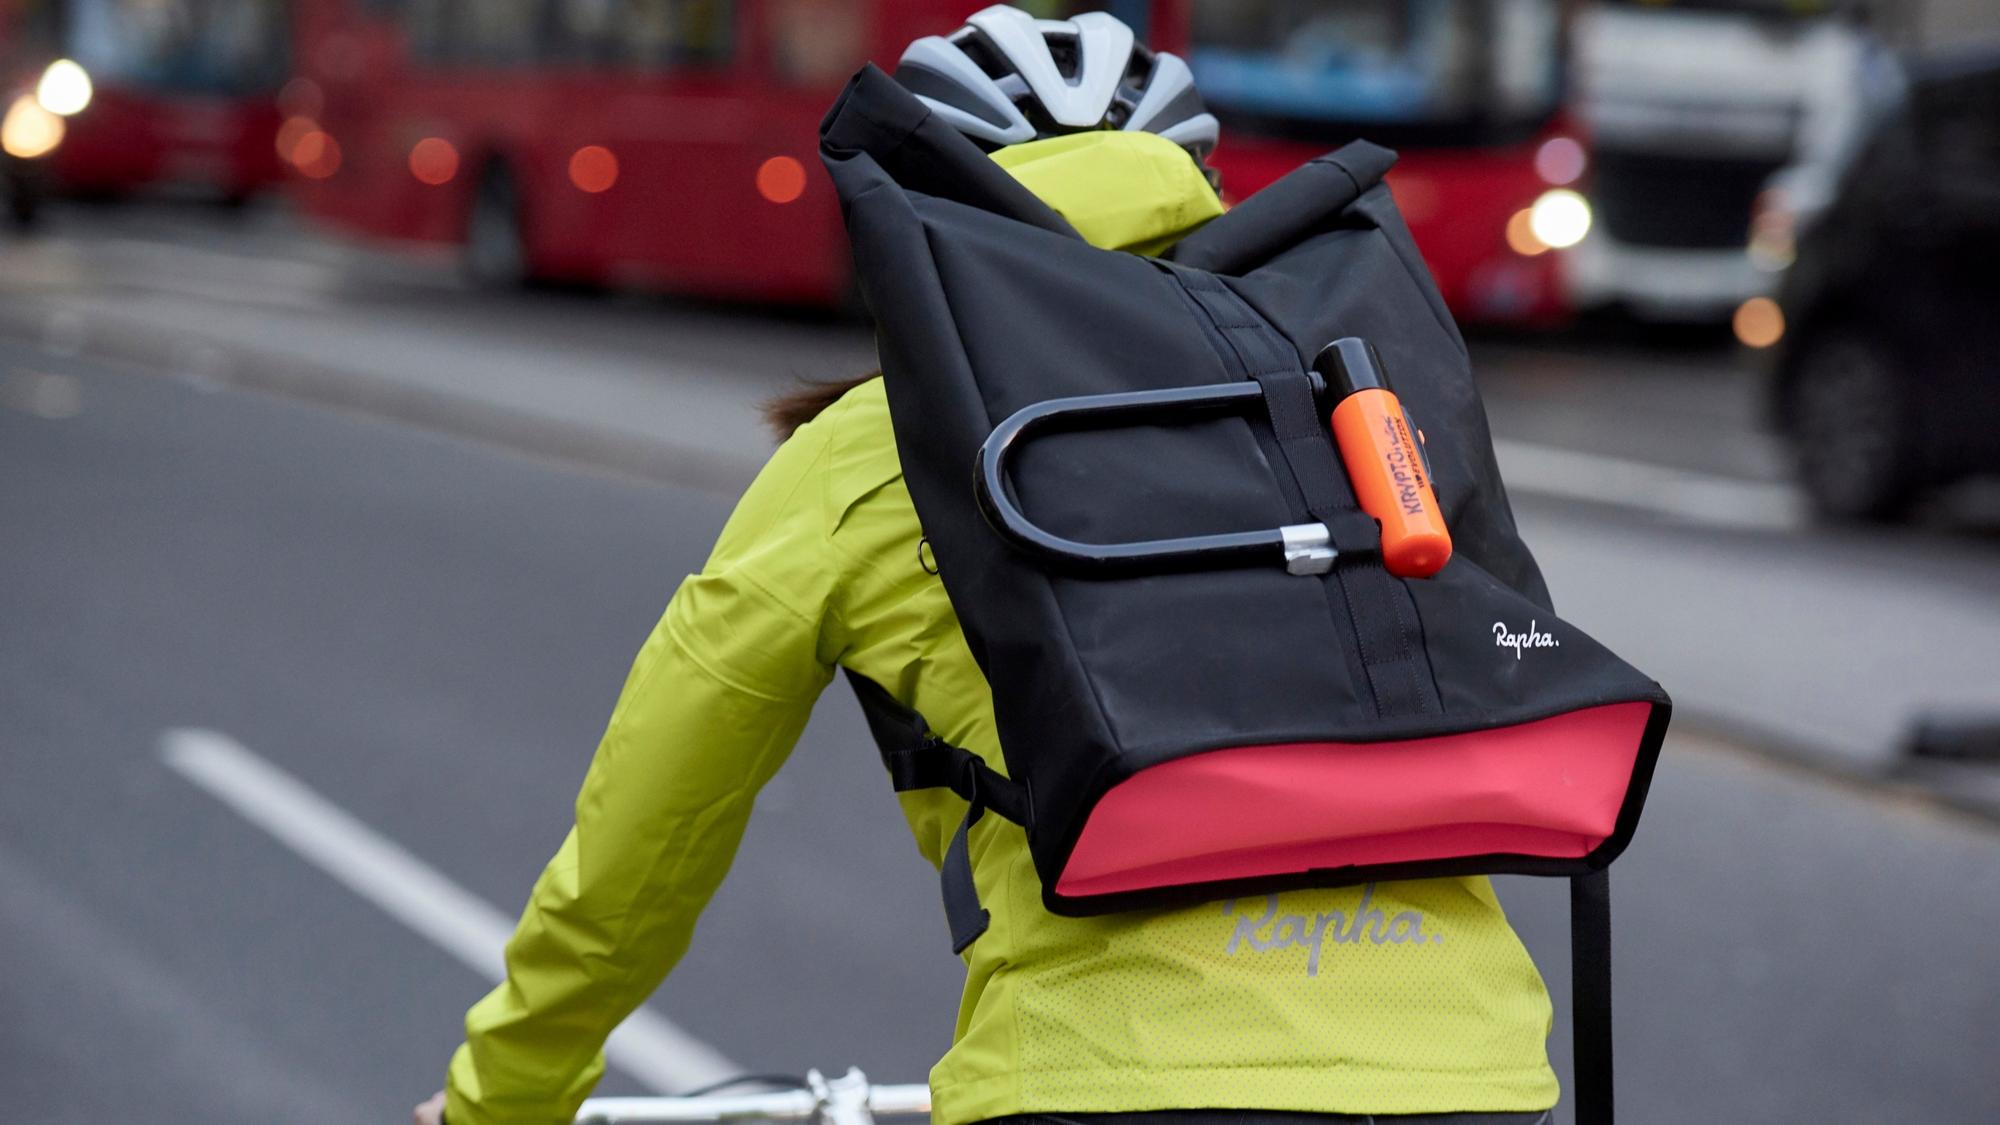 Rapha packs it away with three new bags for all sorts of rides